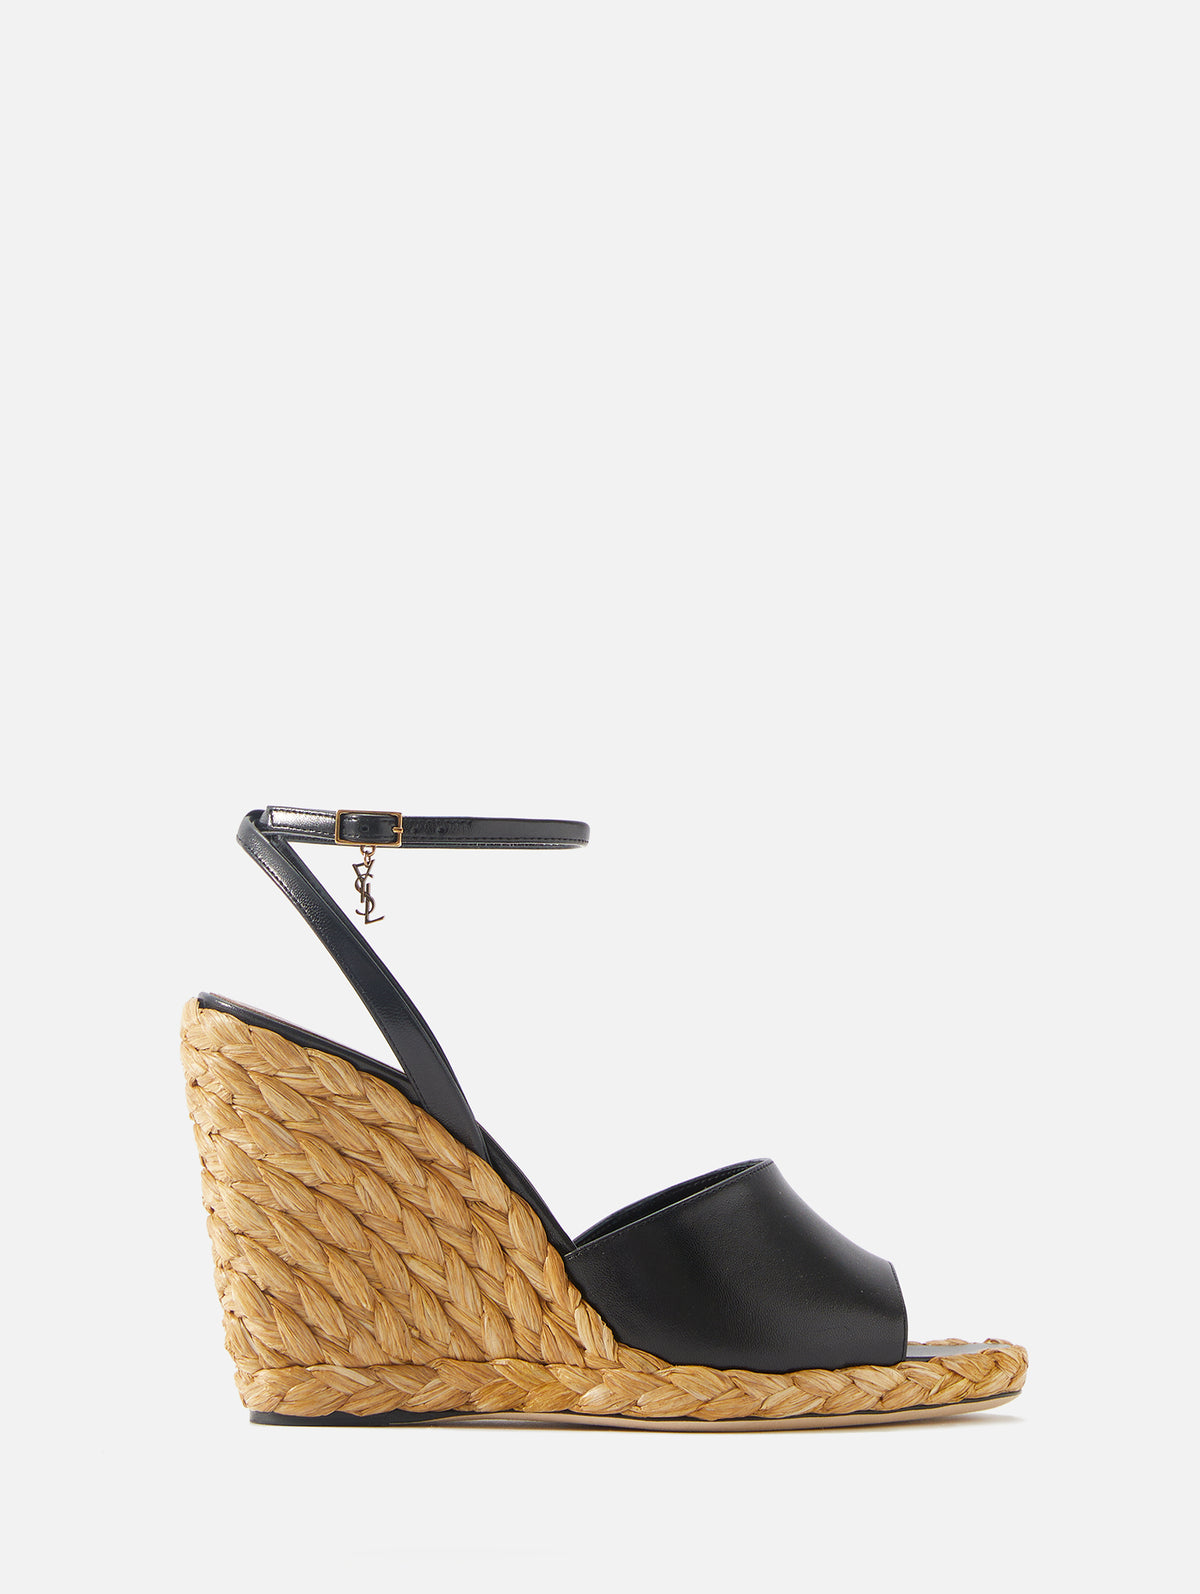 wedge espadrille shoes